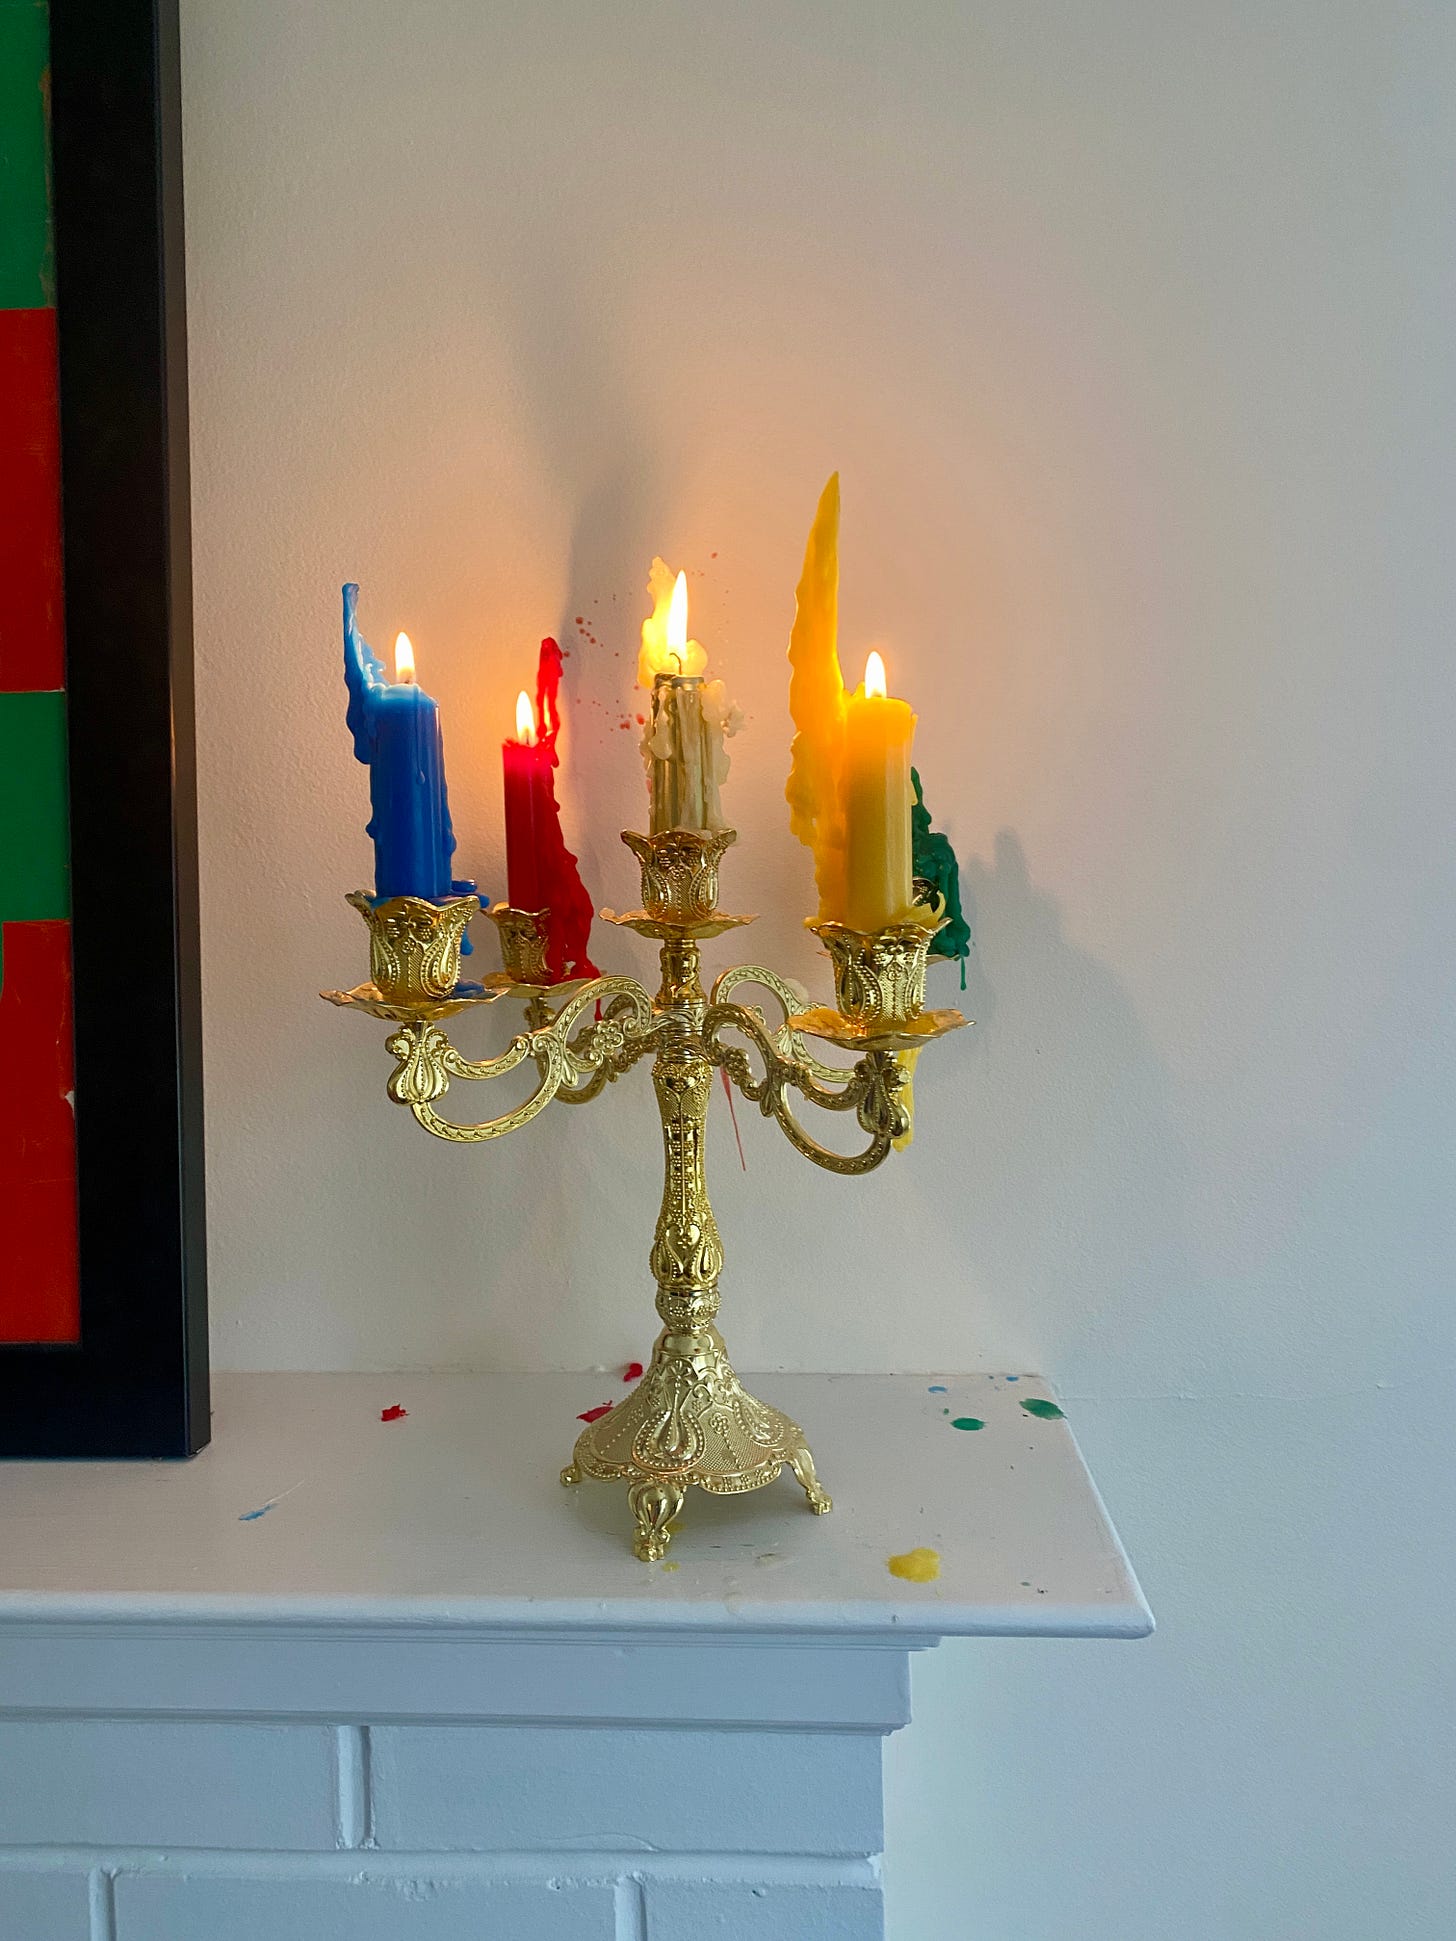 A photo of a gold candalabra sitting on a white fireplace mantle. In the candle holder there are five candles — red, blue, green, yellow, and gold. They are all lit taper candles that have burned 2/3rds of the way down. There are wax drops and drippings on the wall and the mantle.